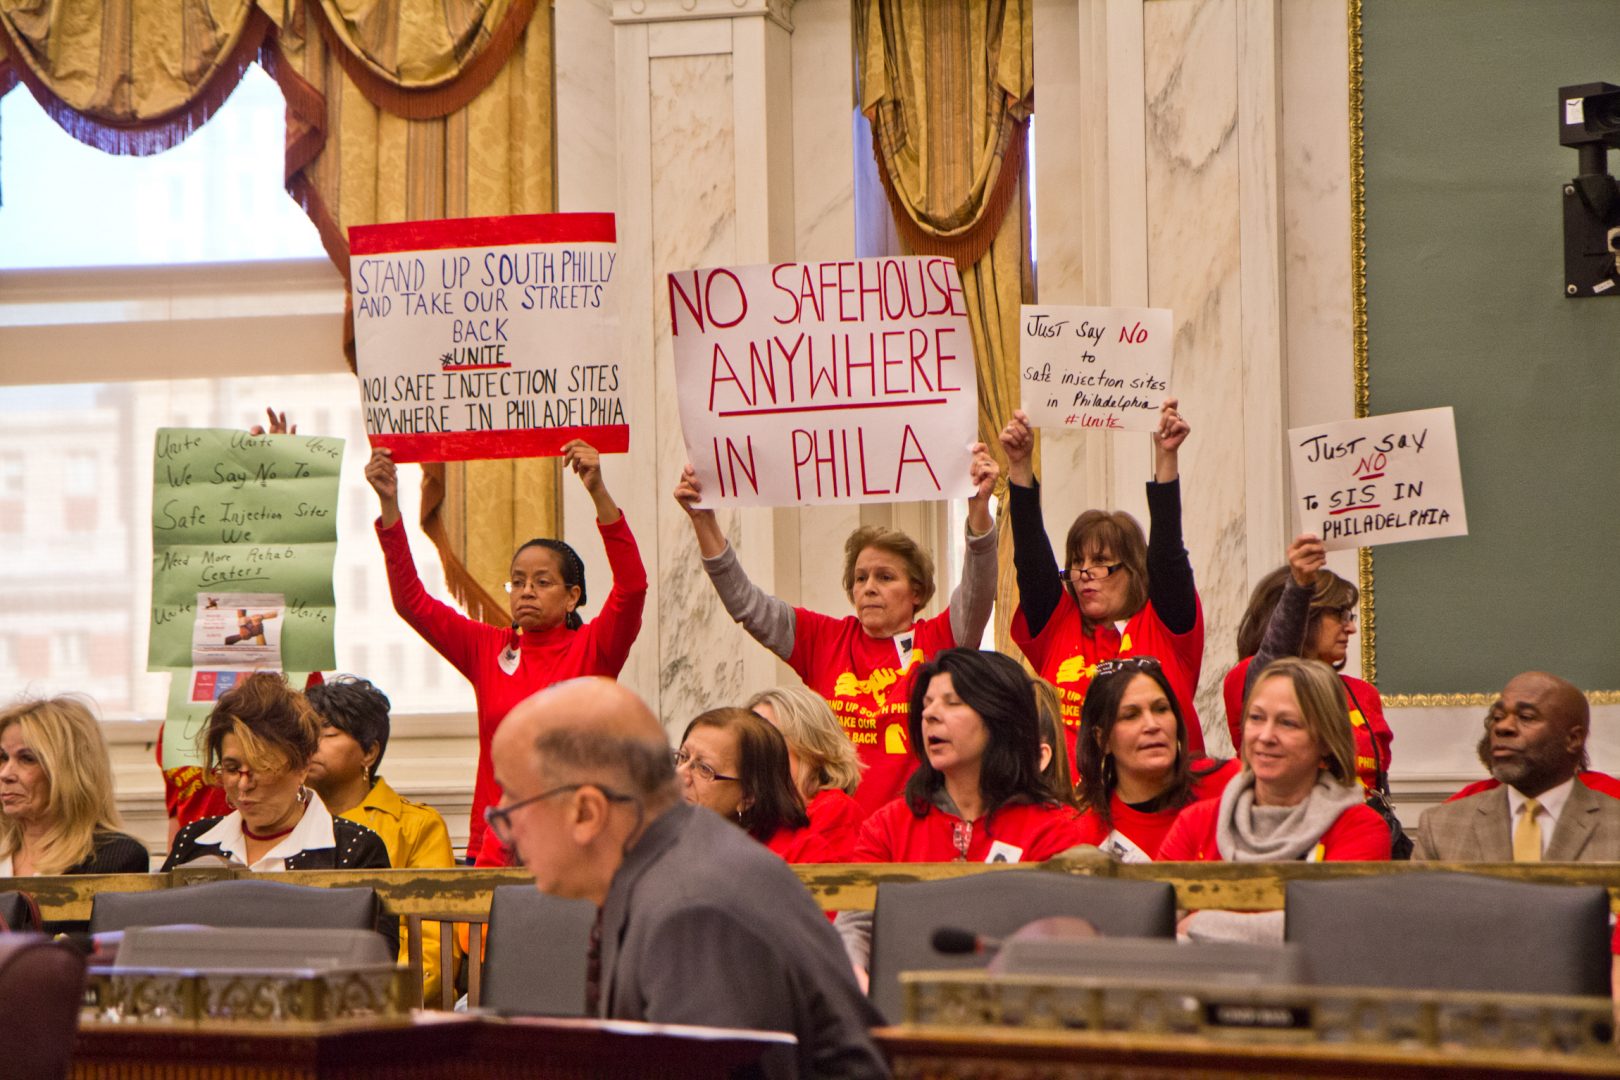 A coalition of South Philadelphia residents cheer opponents of safe injections sites at a hearing in city council Monday.